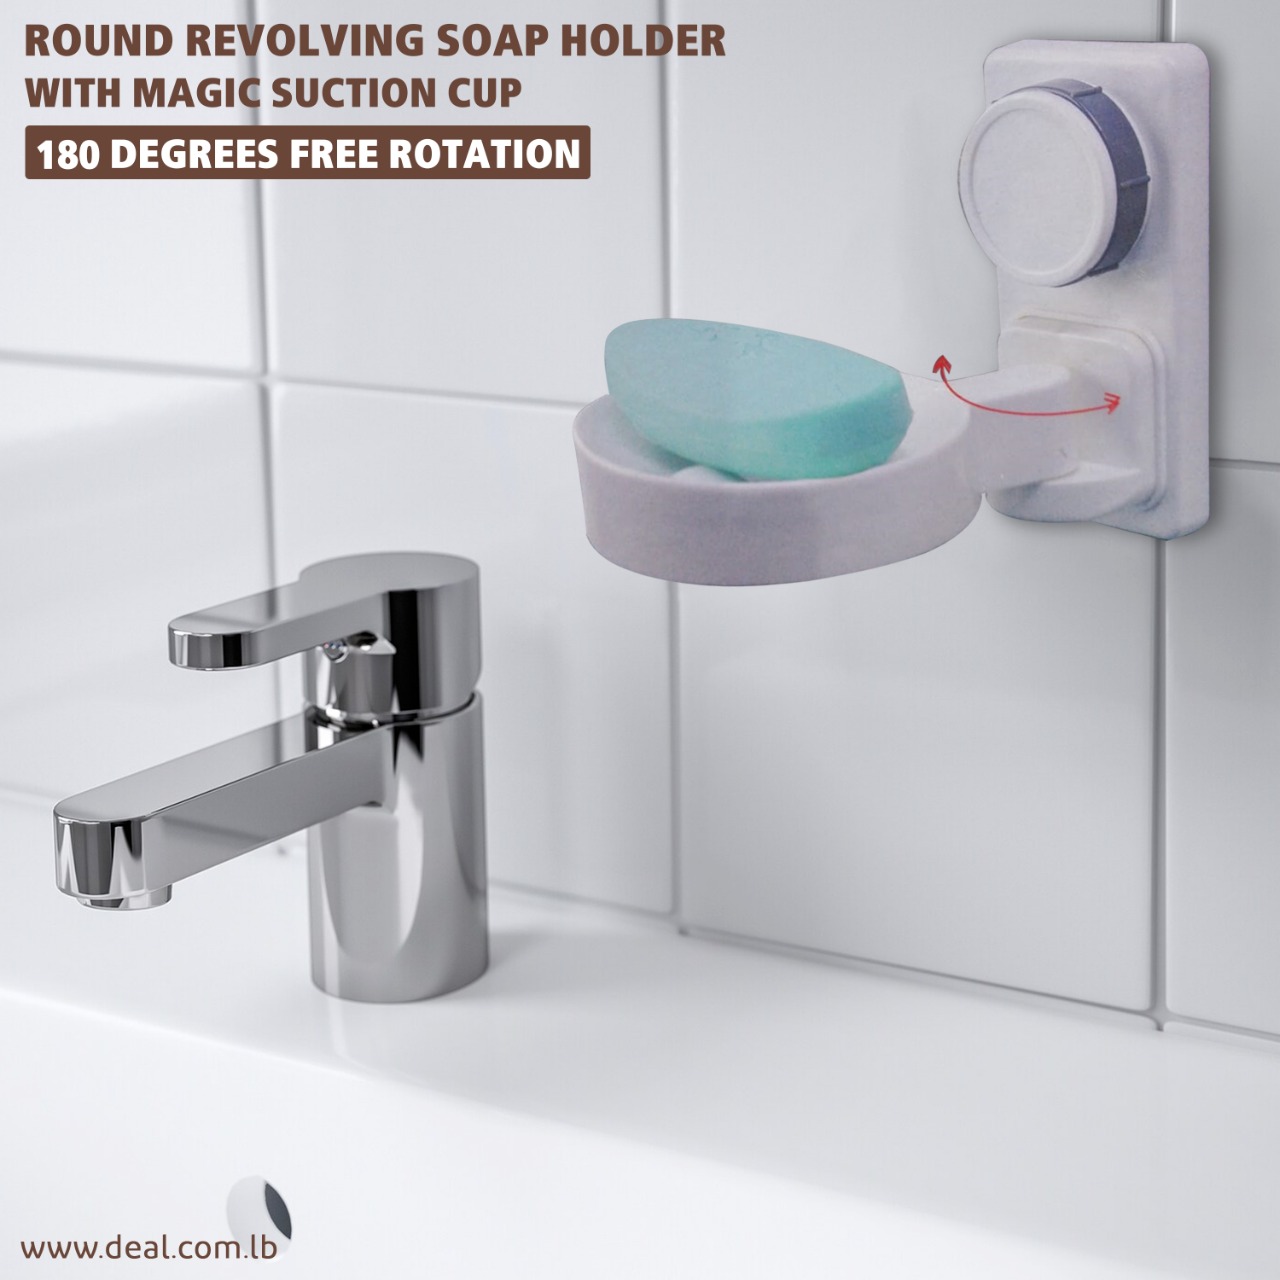 Round Revolving Soap Holder With Magic Suction Cup | 180 Degrees Free Rotation